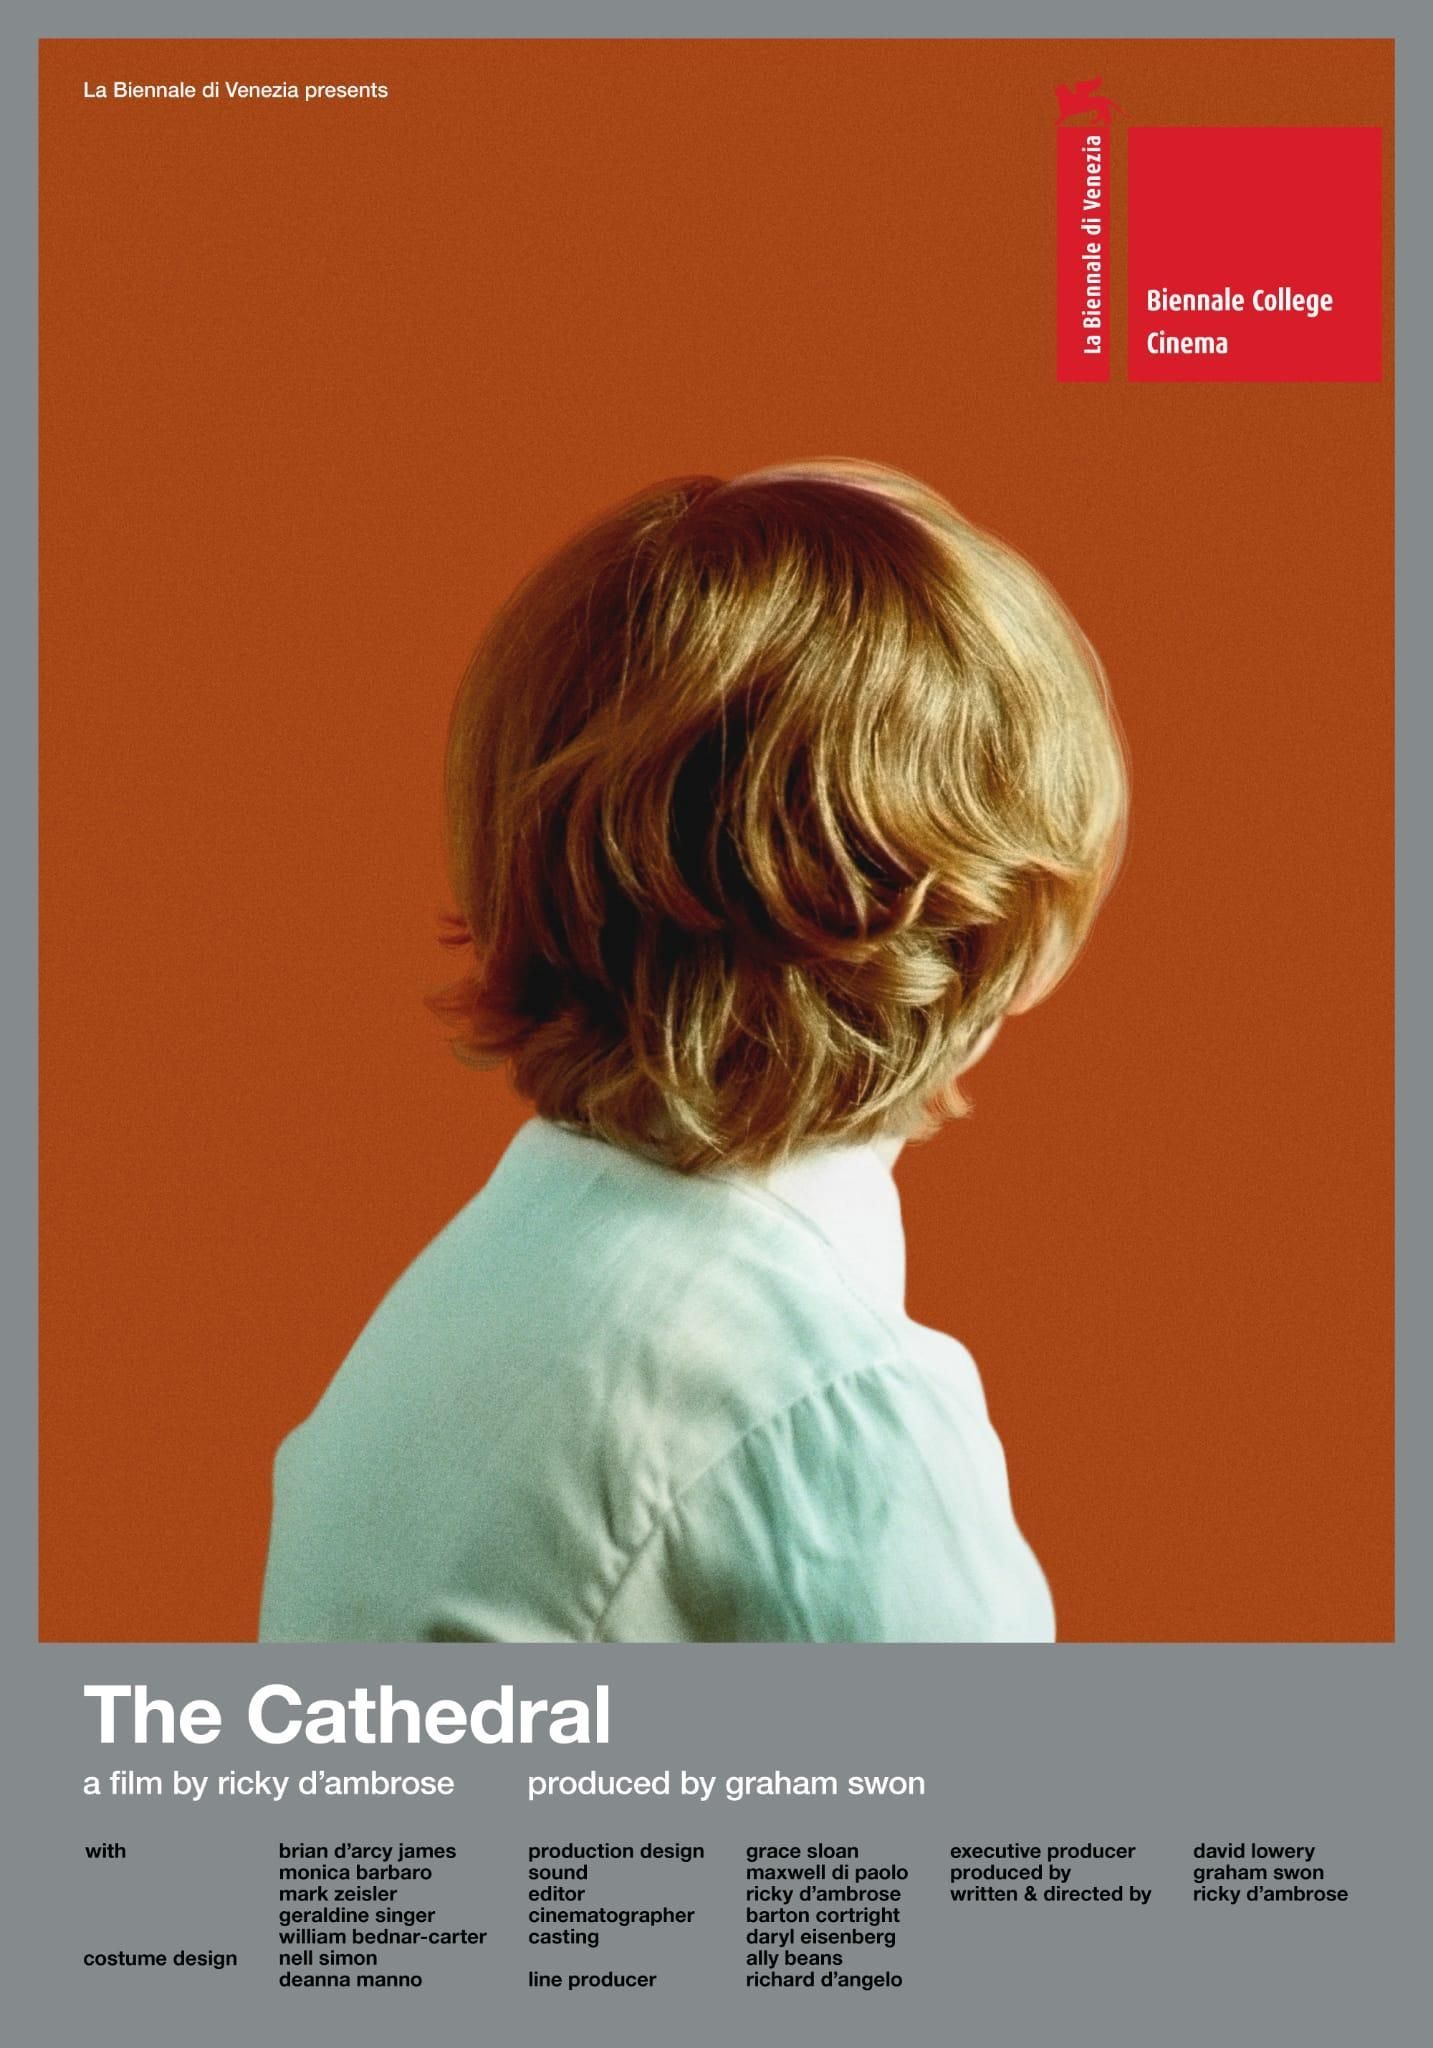 Clean Slate: On Ricky D’Ambrose’s “The Cathedral”